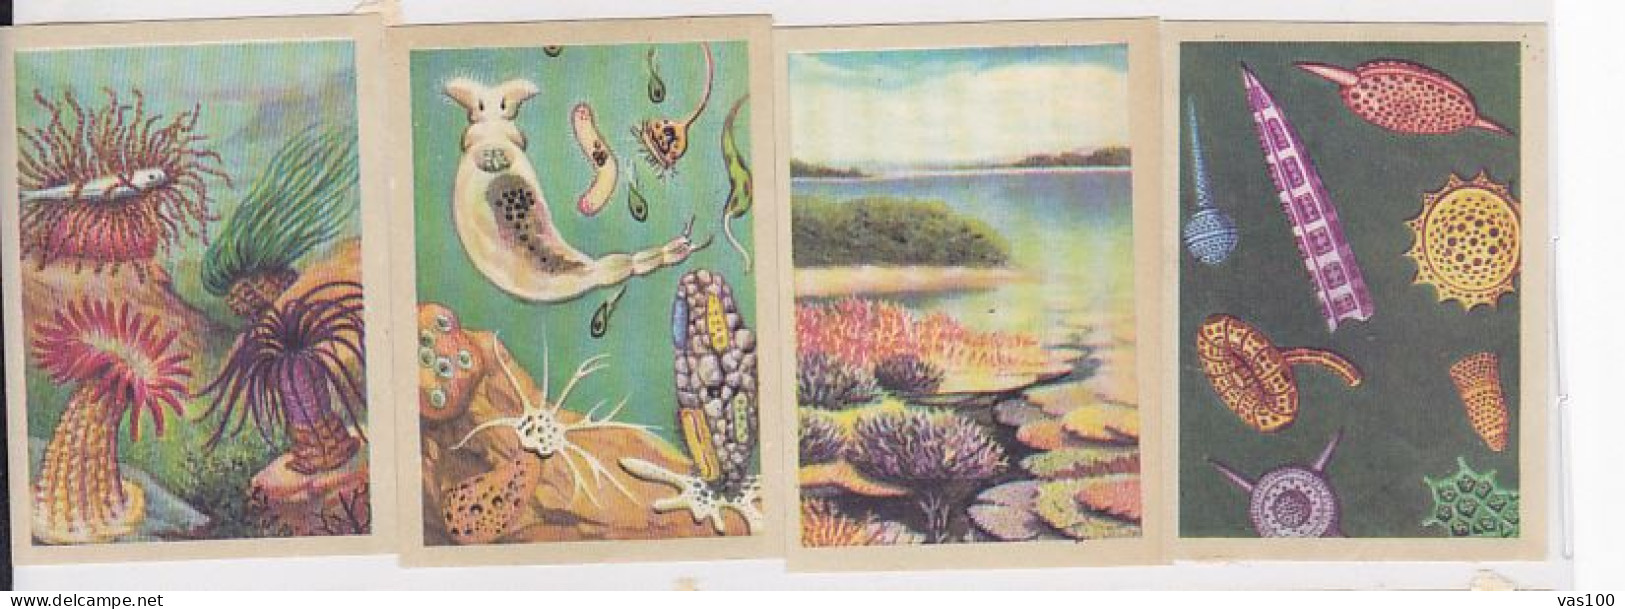 TRADE CARDS, CHOCOLATE, JACQUES, MARINE LIFE, CORALS AND INVERTEBRATES, 4X - Jacques